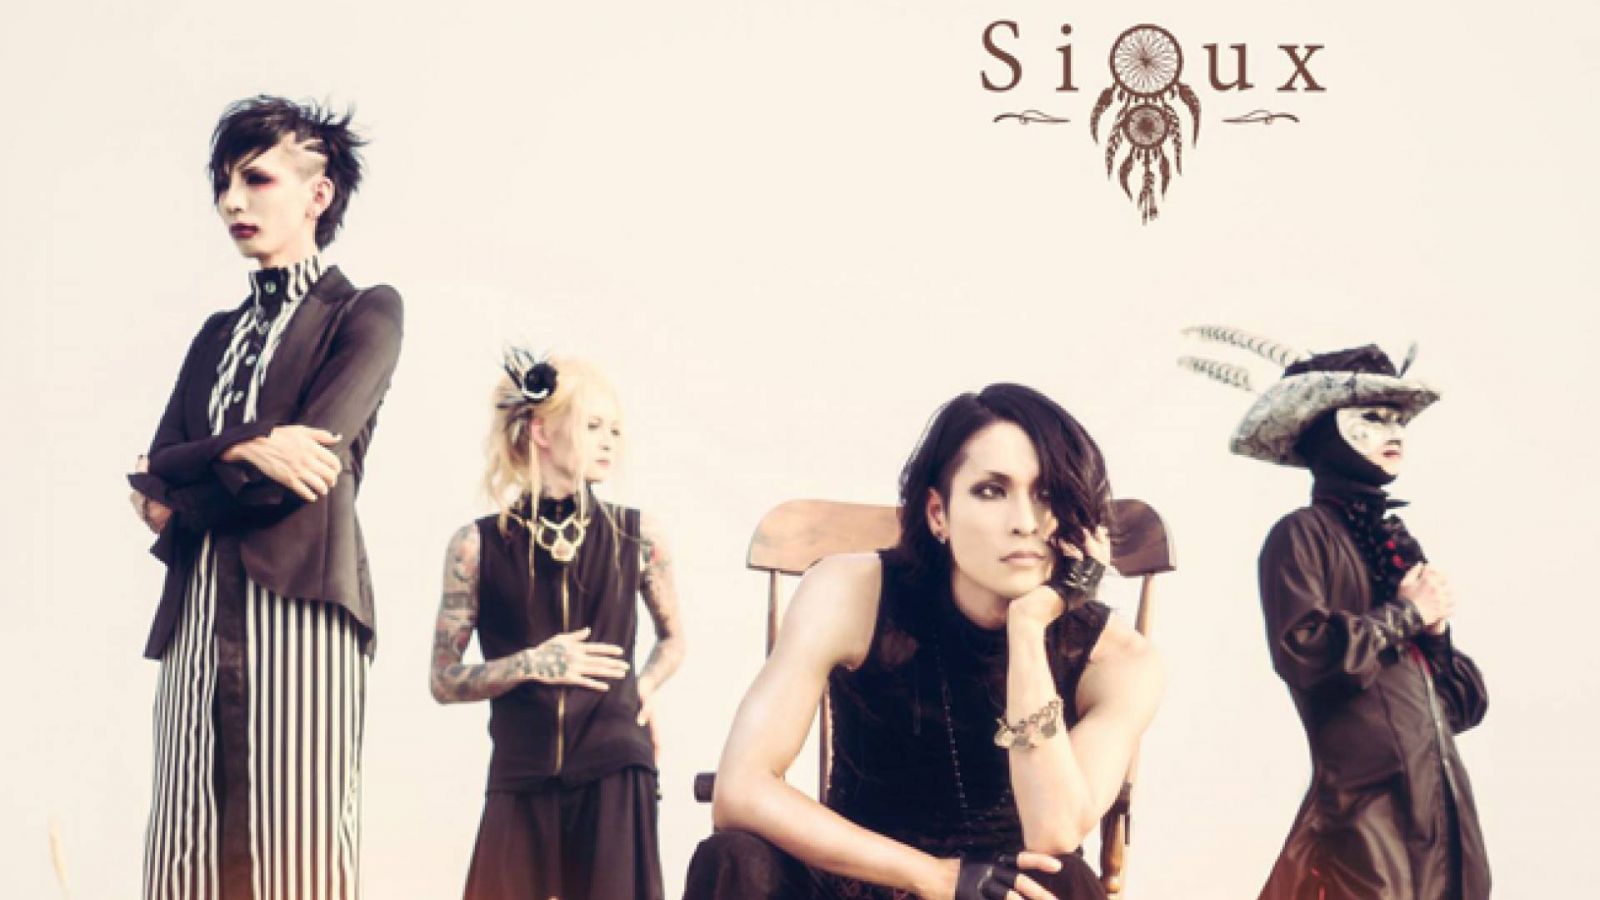 New Single from Sioux © Sioux. All rights reserved.